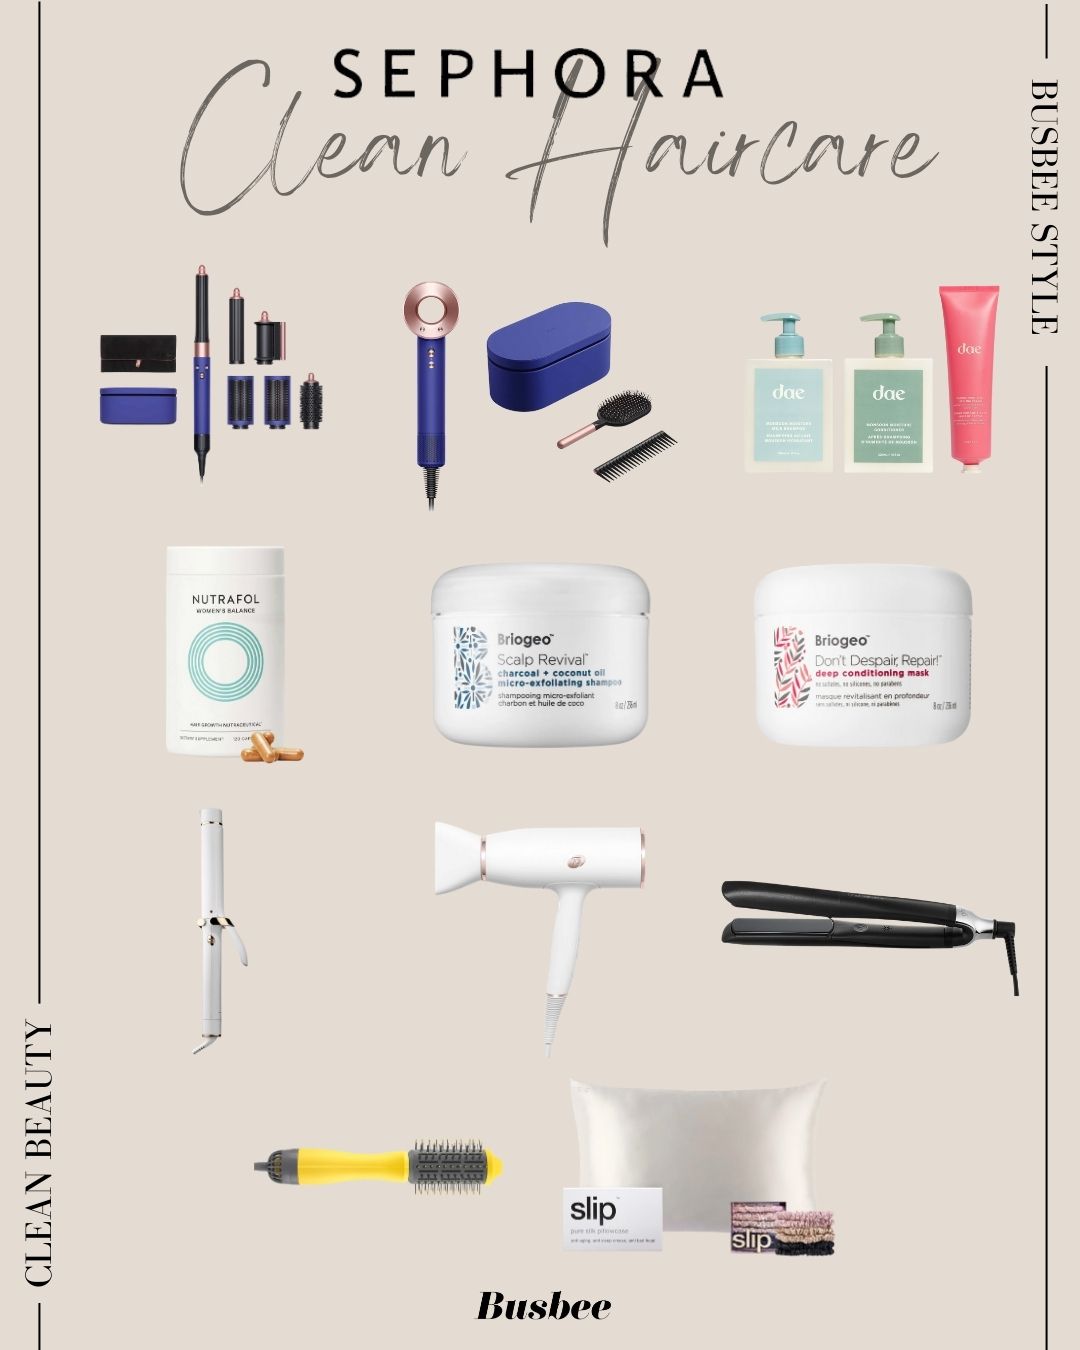 Sephora Clean haircare products